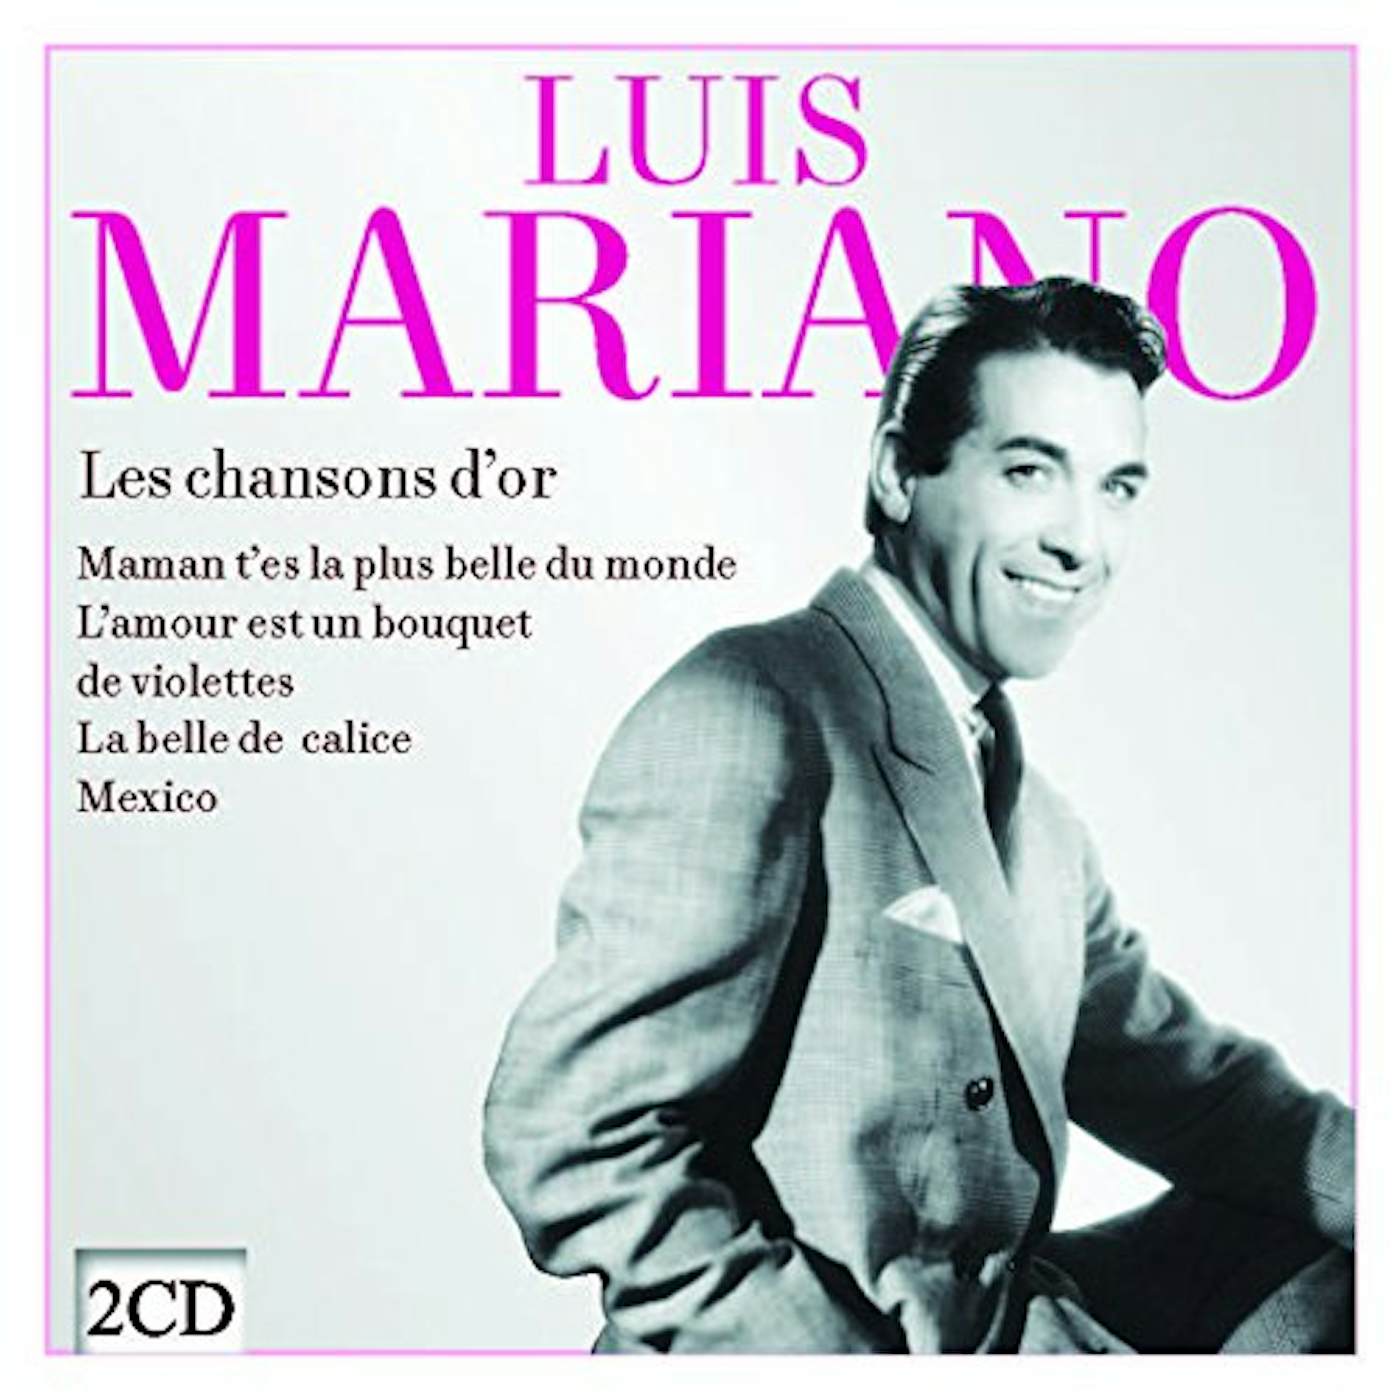 Luis Mariano LES CHANSONS D'OR CD